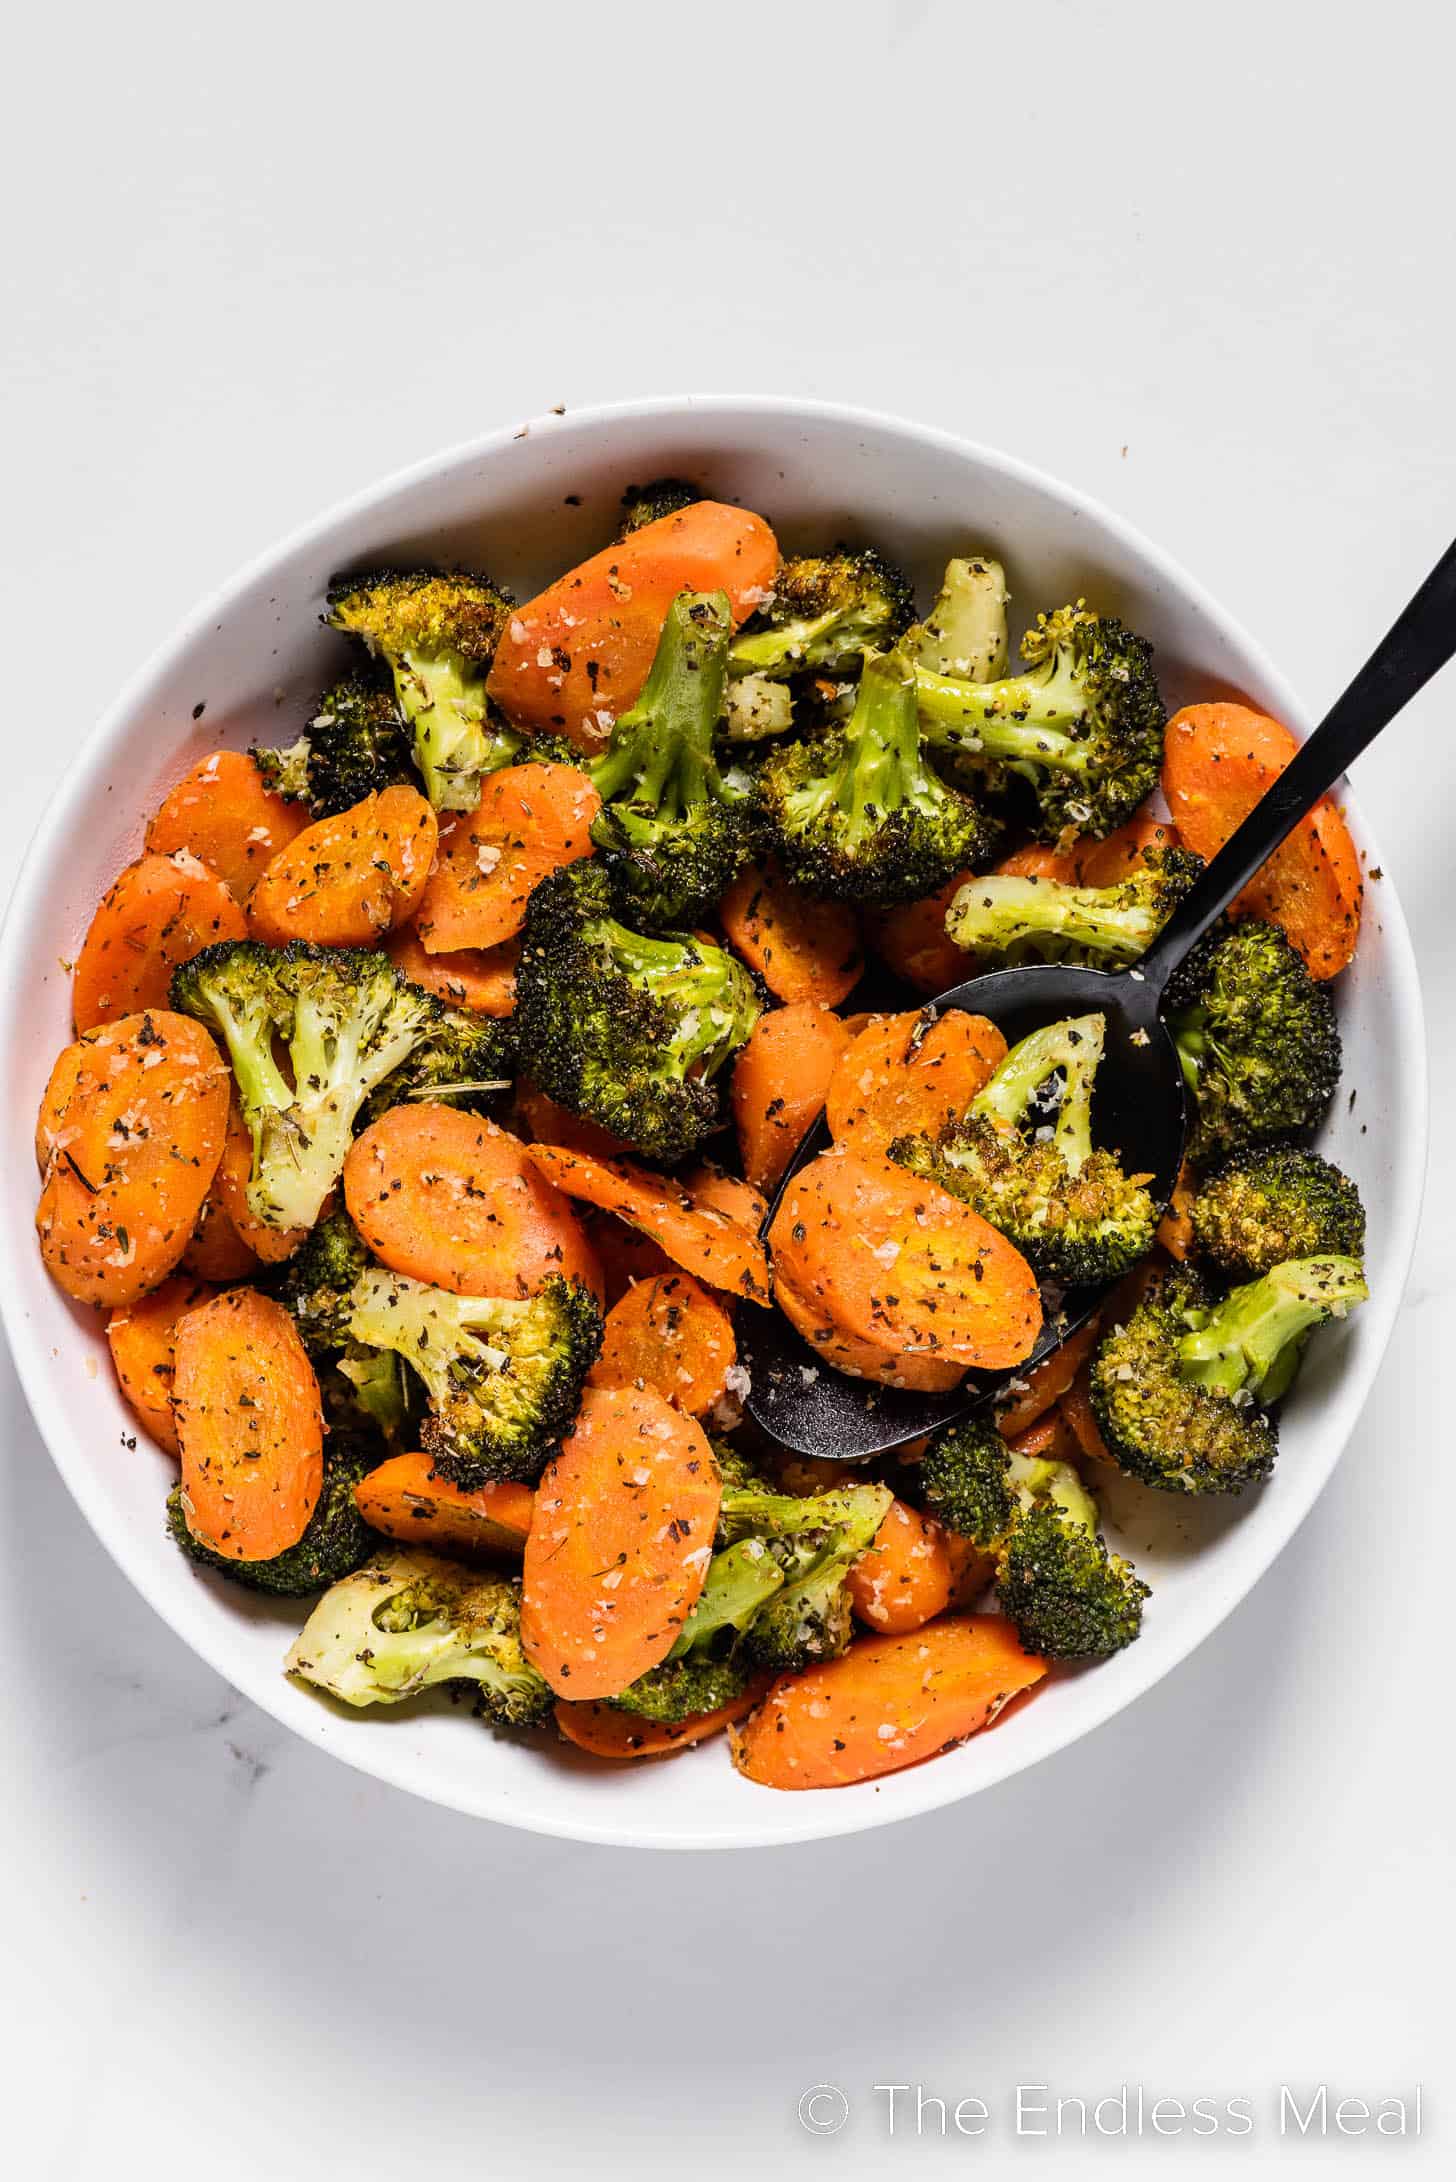 roasted carrots and broccoli in a serving dish